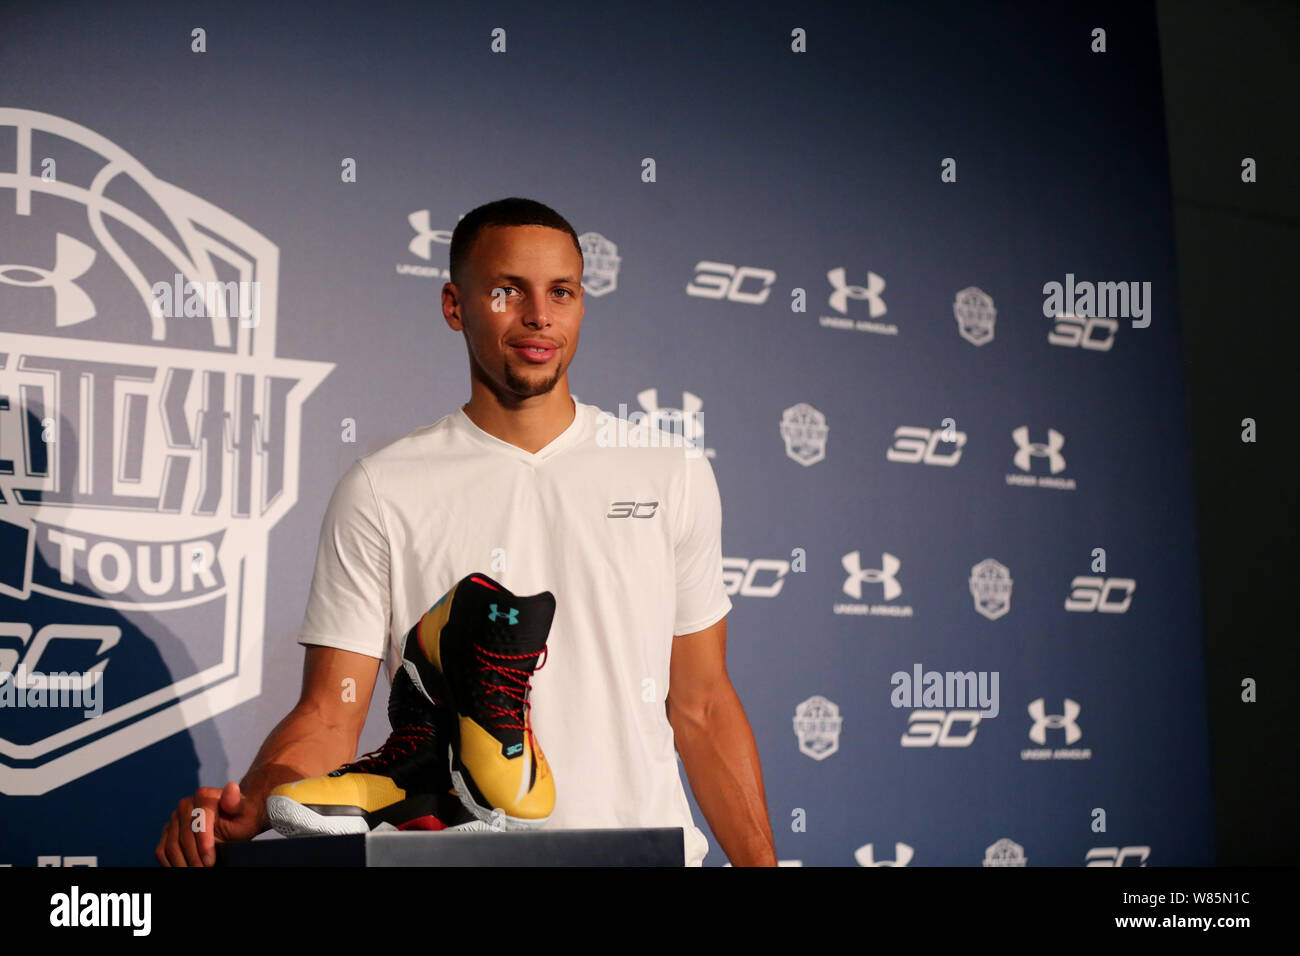 NBA star Stephen Curry poses during a press conference for the 